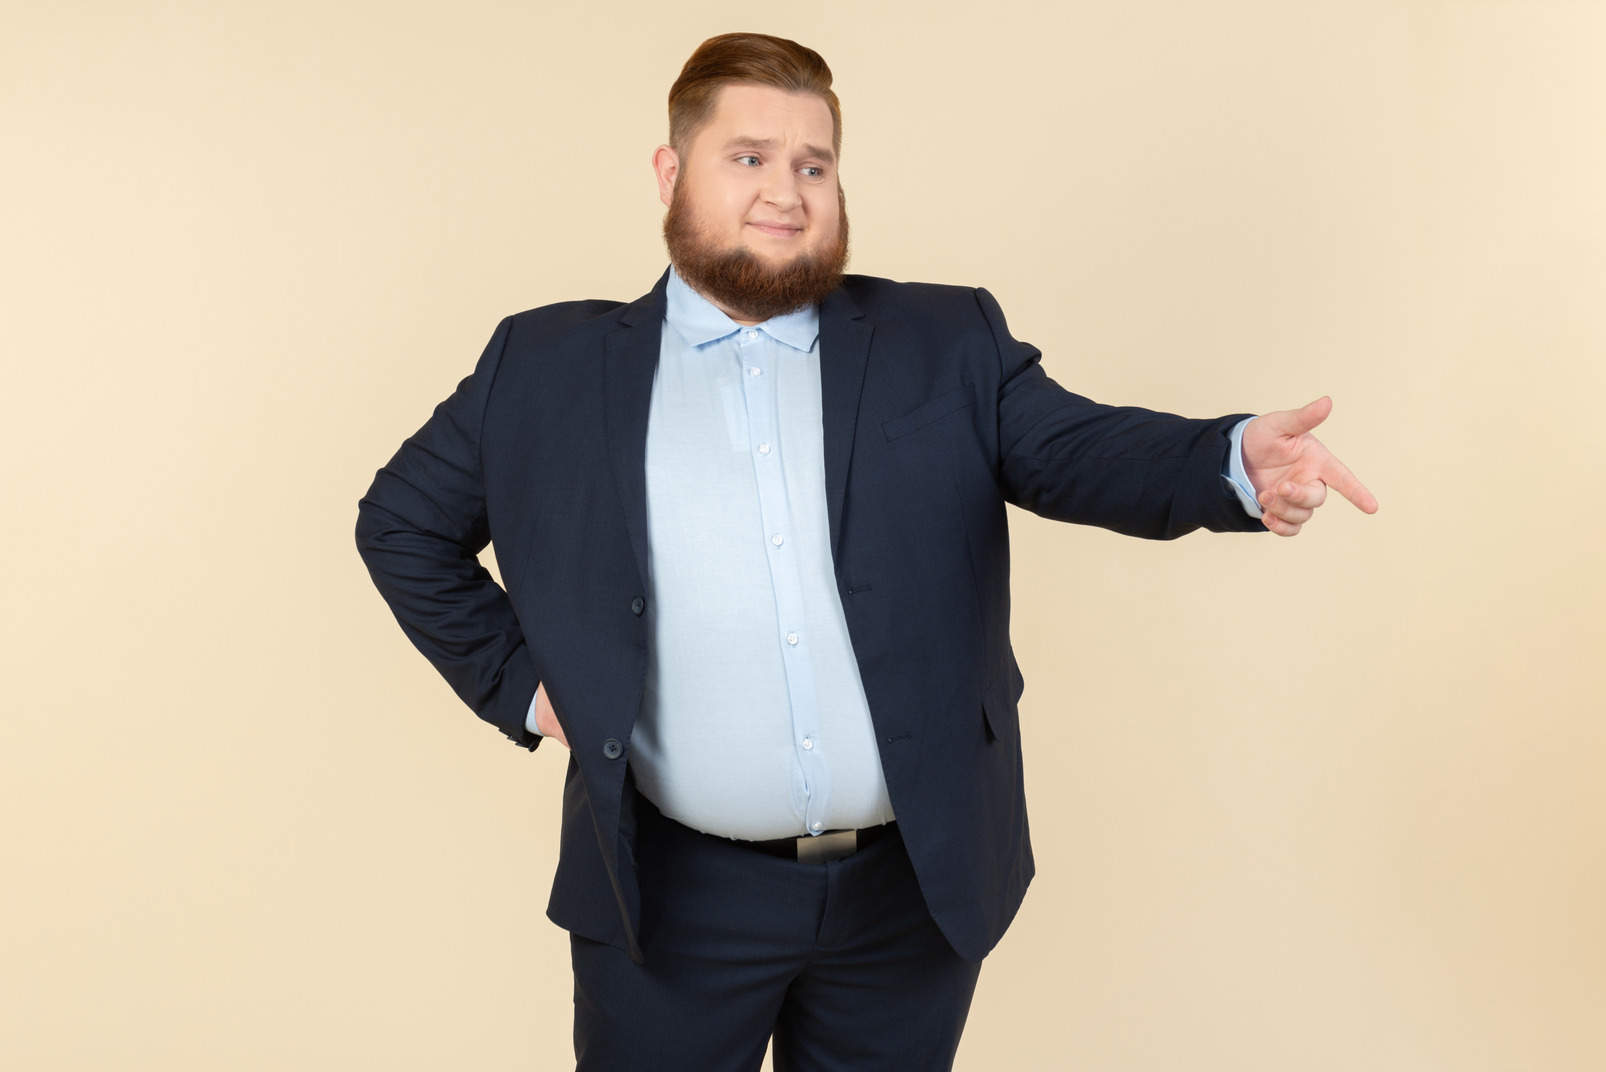 Young overweight man in suit laughing